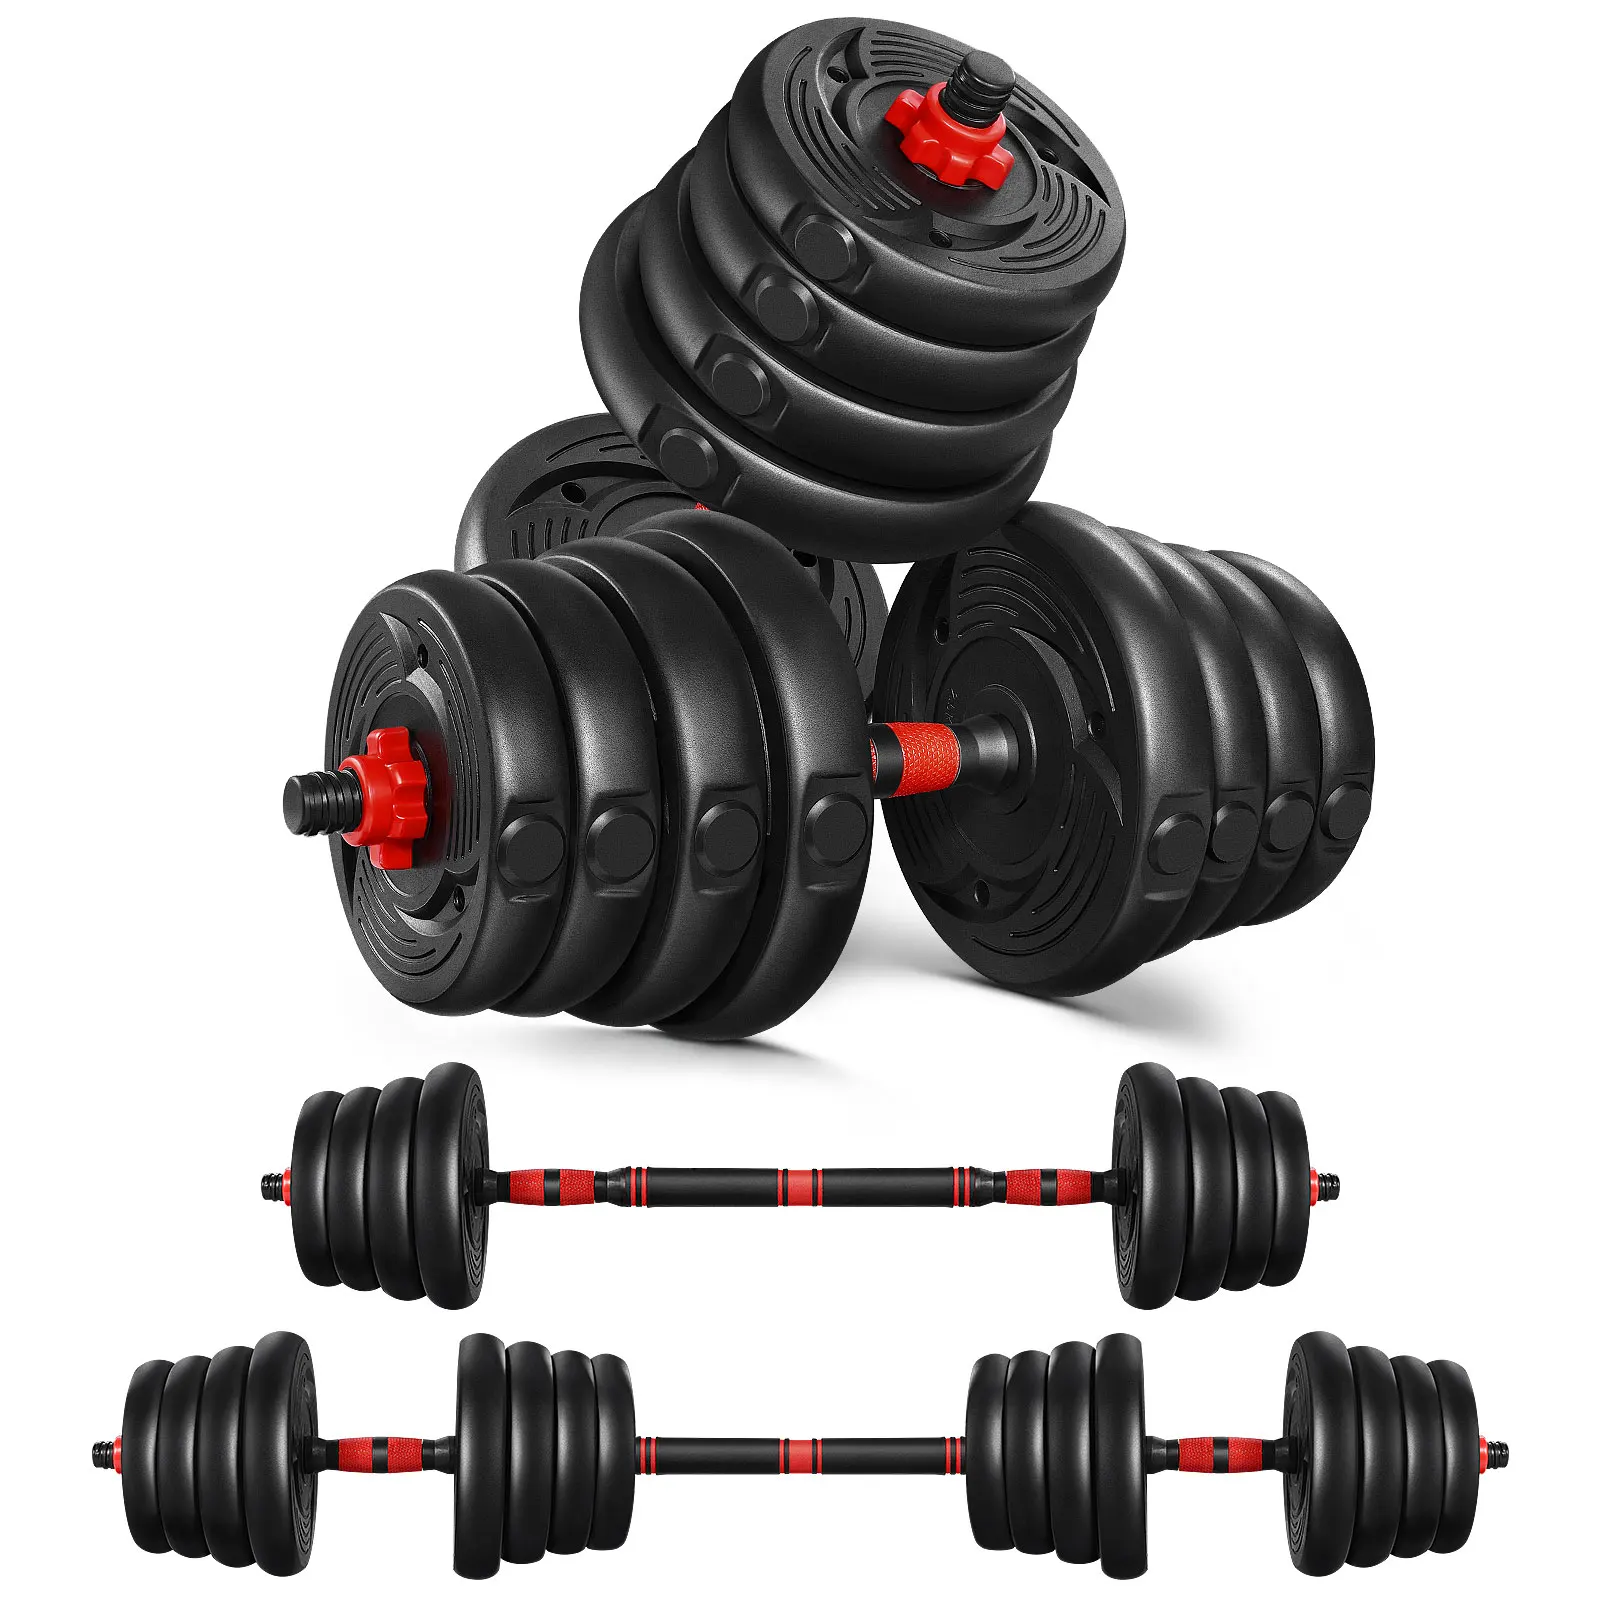 

2-In-1 Adjustable Dumbbell Set Barbell Exercise Sport Supplies For Building Body Losing Weight Mancuernas Pesas Gimnasio 2021